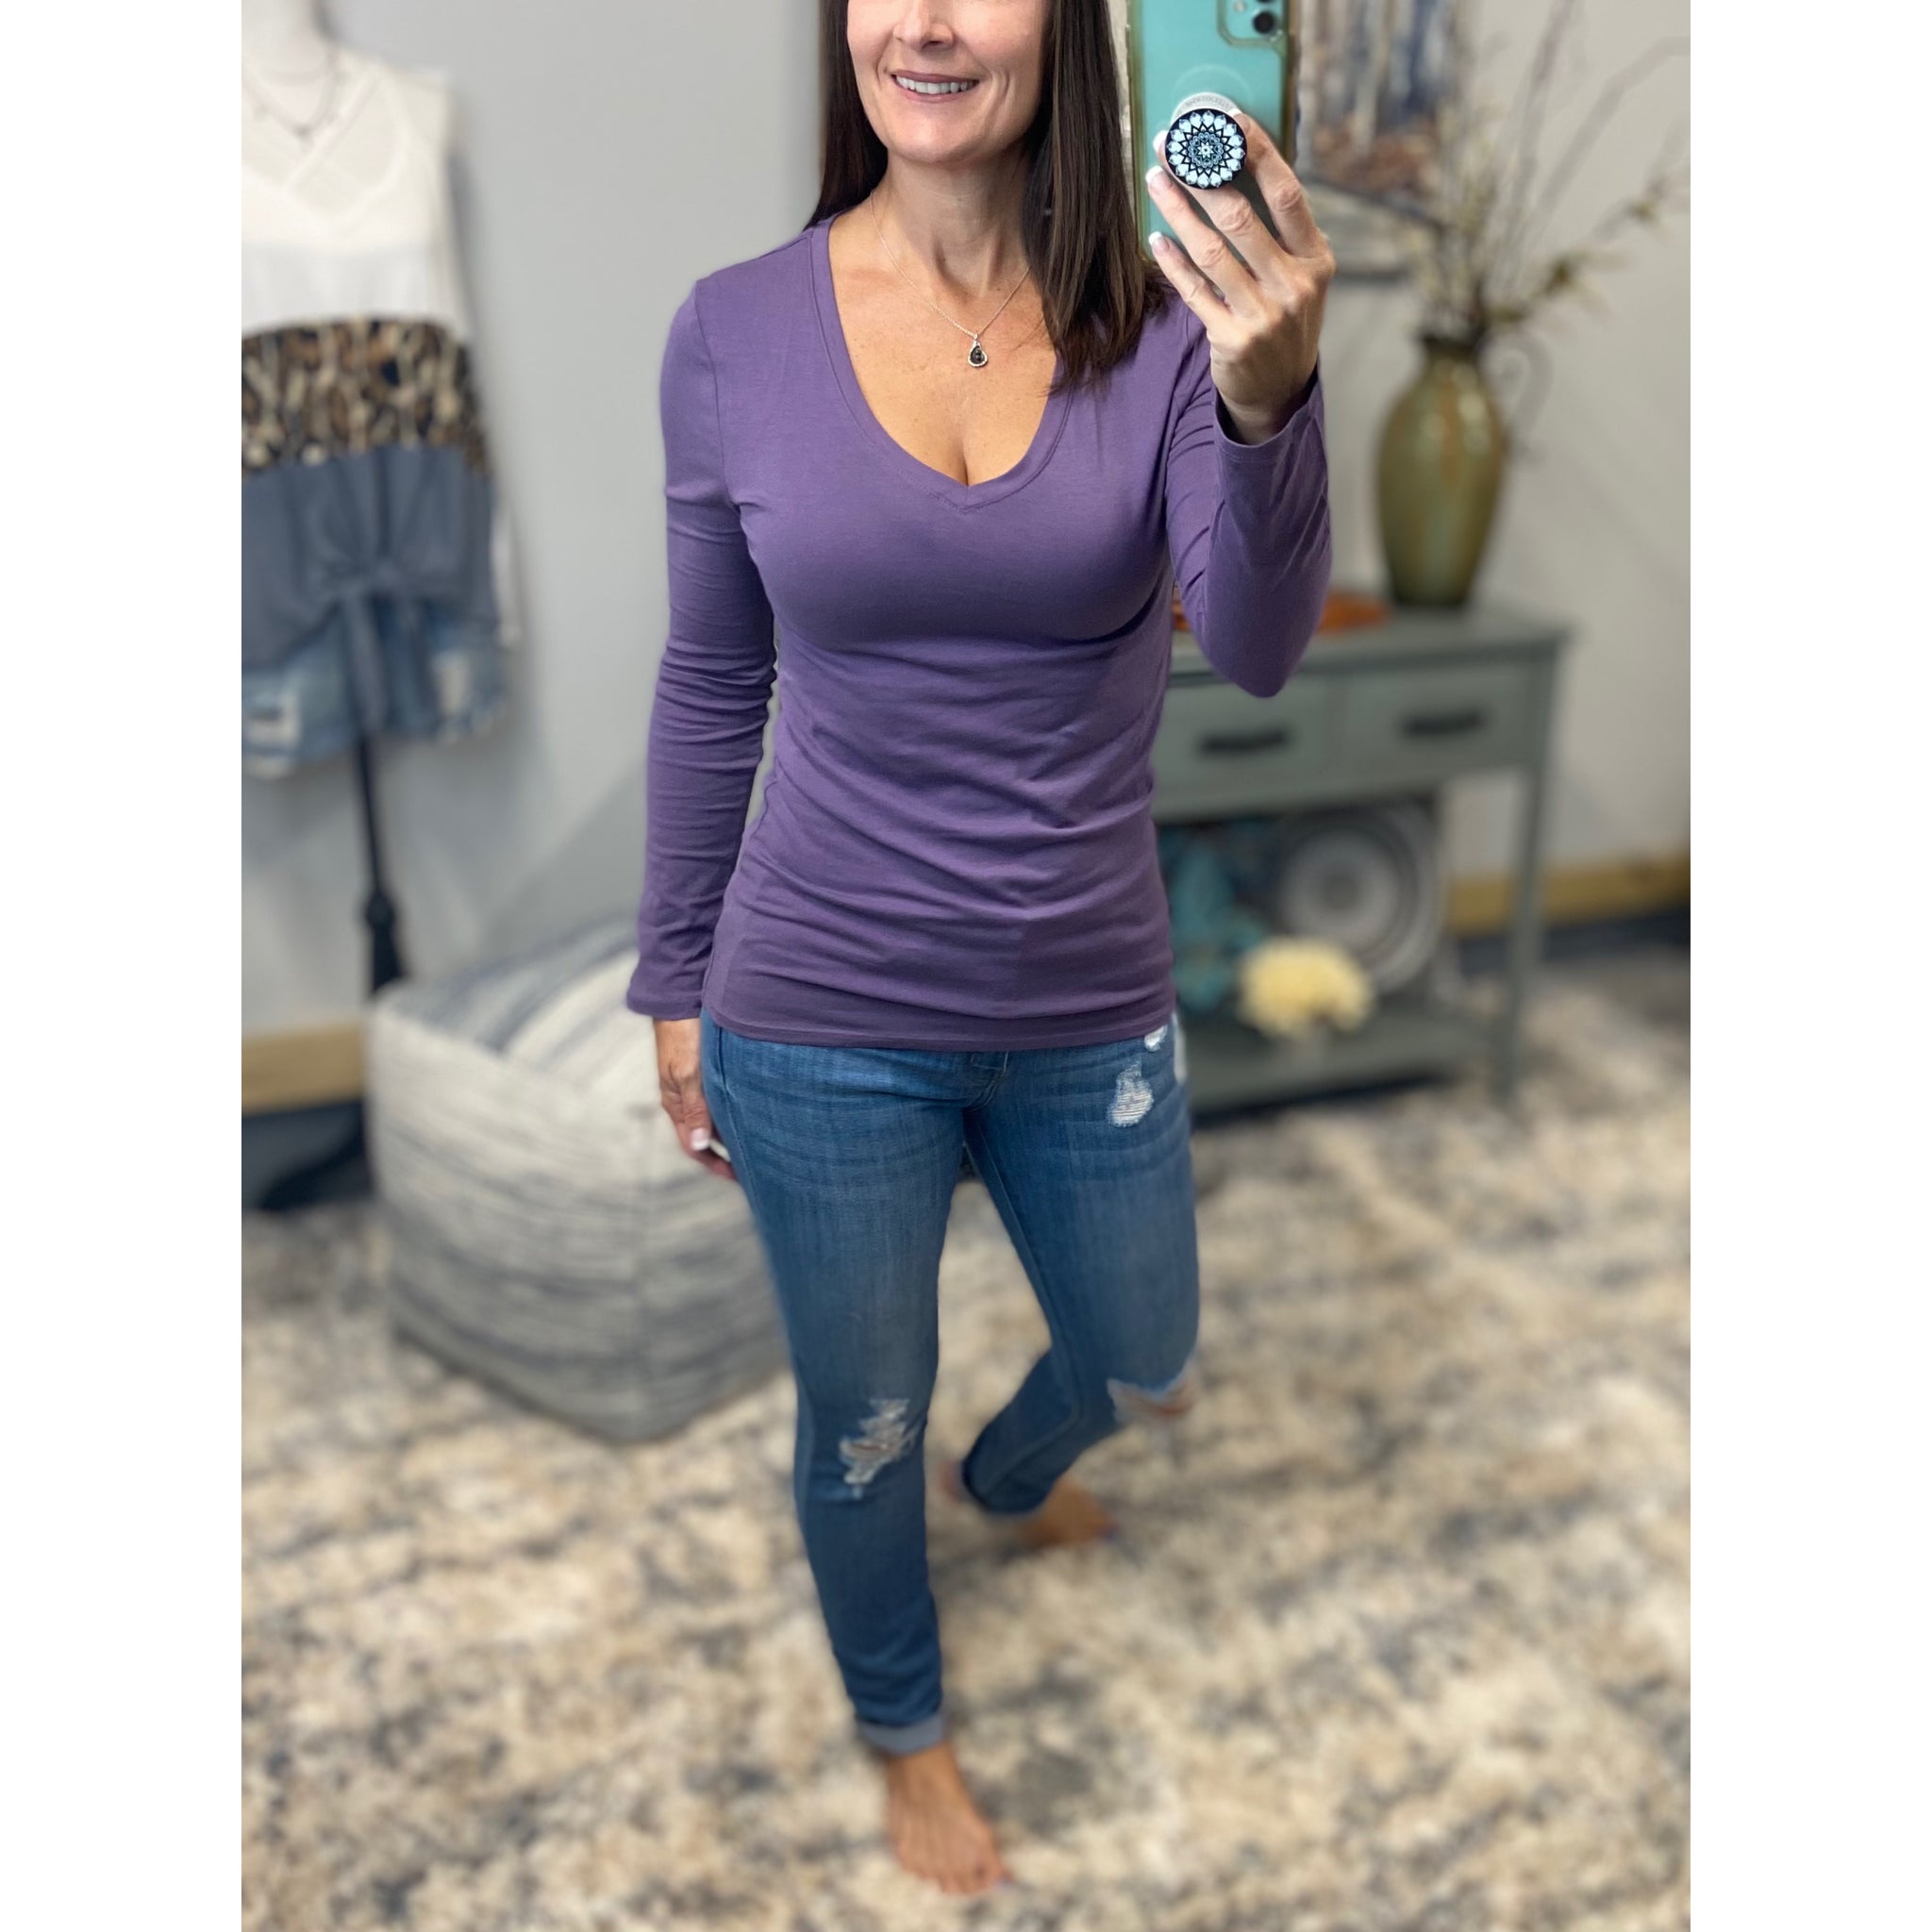 “Easygoing” Loose Slimming V Neck Low Cut Long Sleeve Tissue Basic Baby Shirt Top Lilac